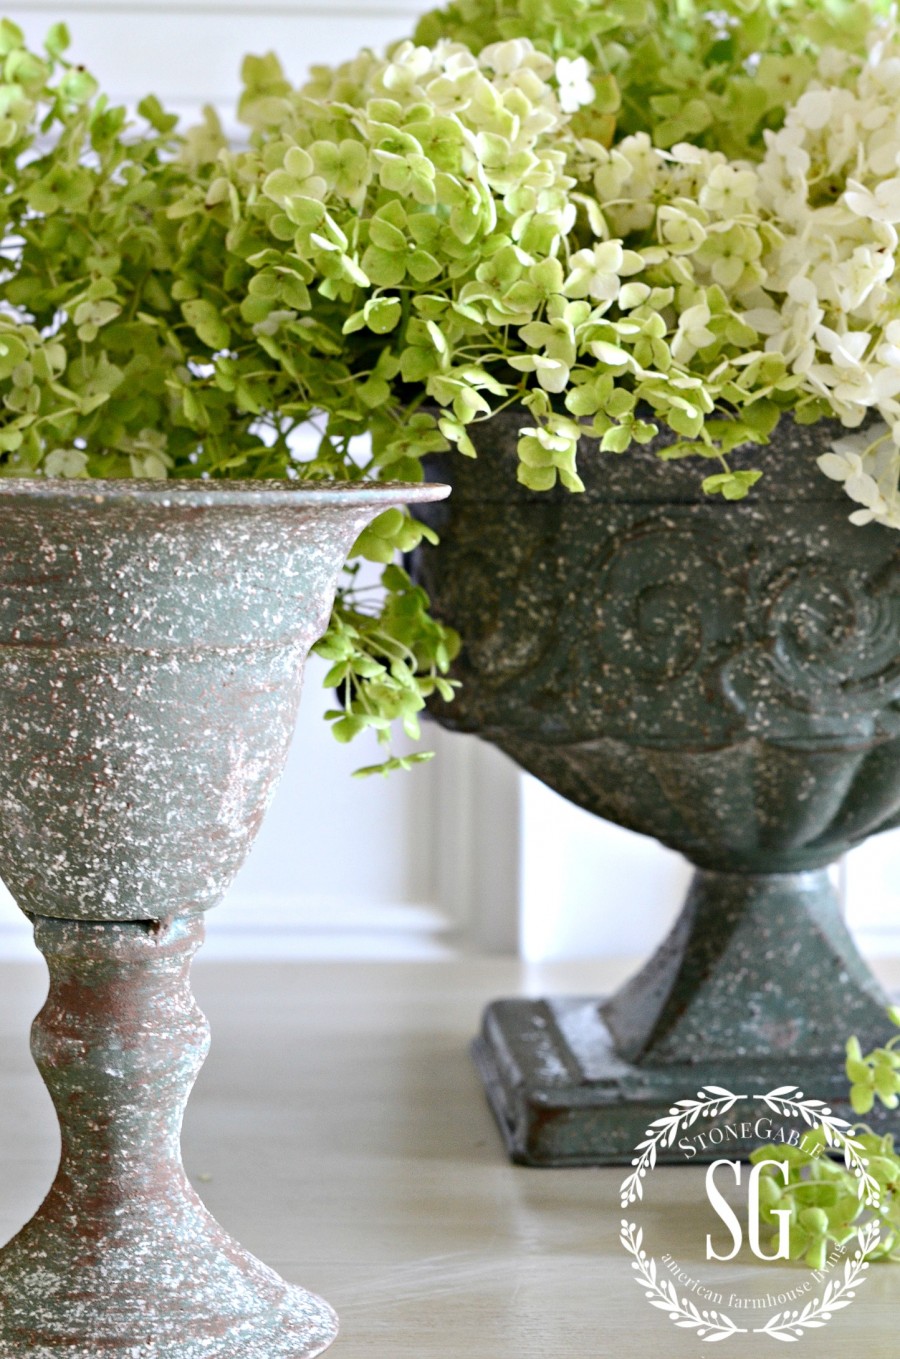 GROUPING LIKE DECOR- trophy urns-with hydrangeas-different sizes-stonegableblog.com